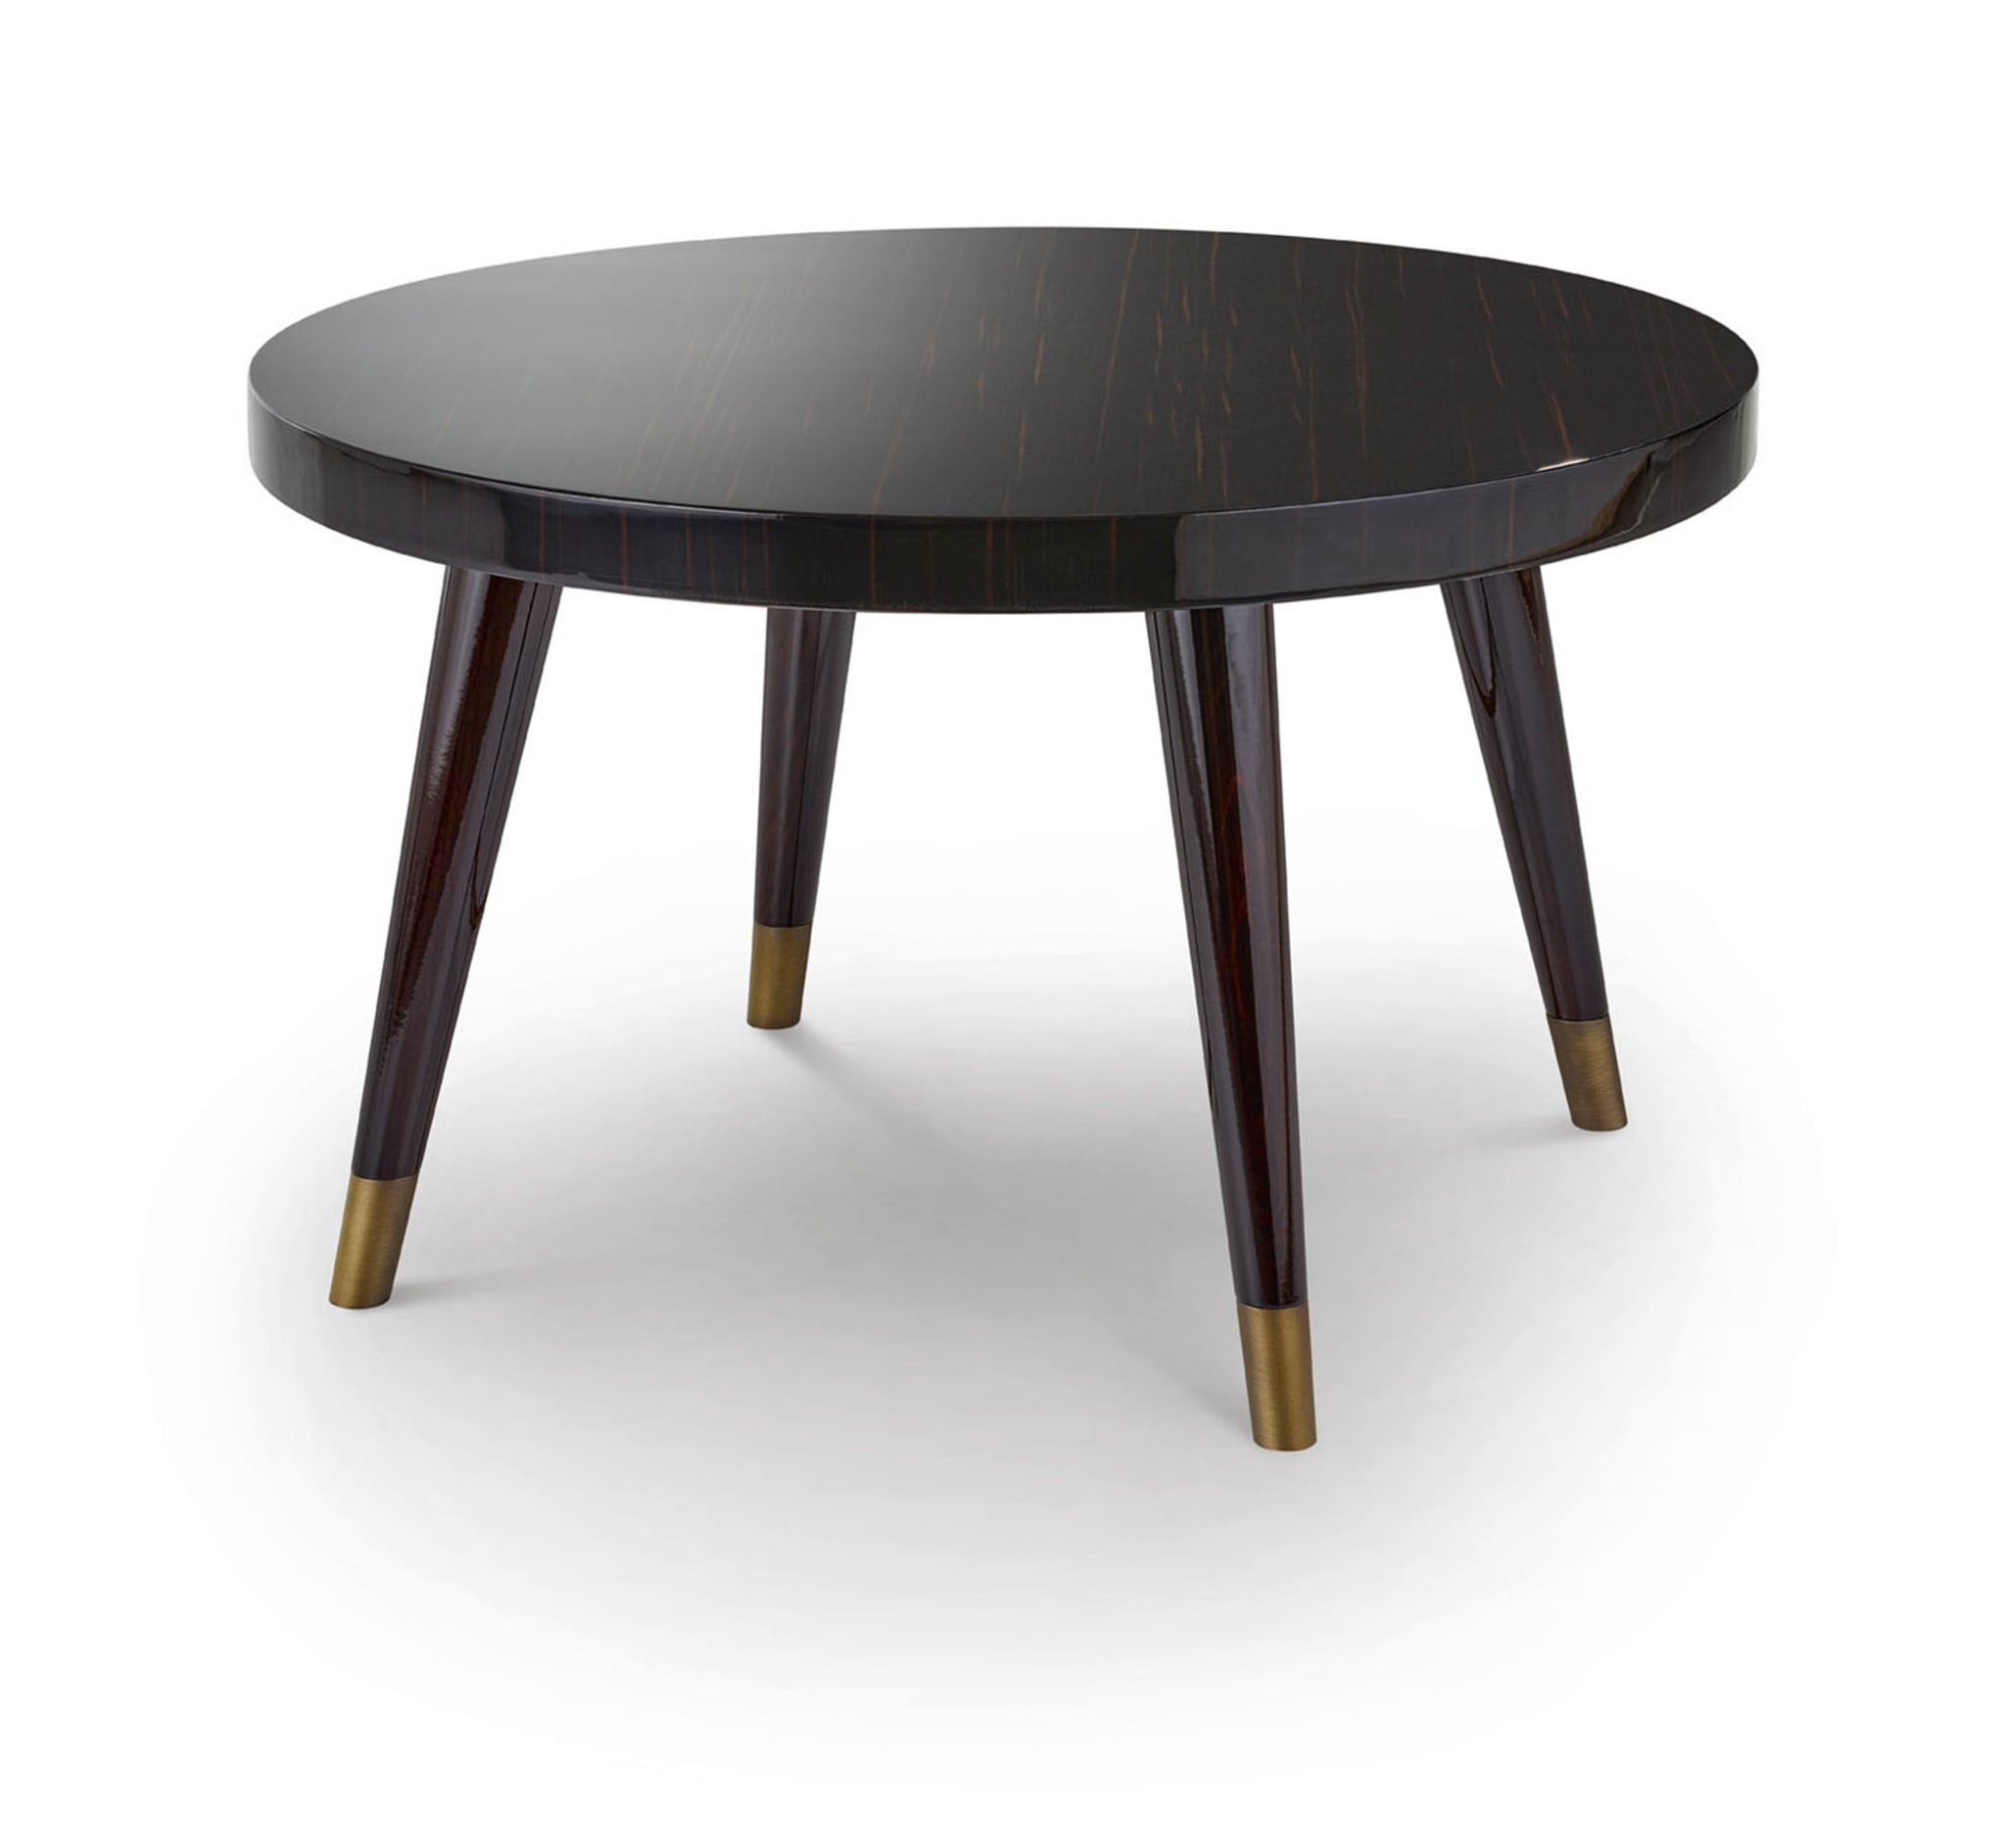 Peggy round side table 80 cm #3 - Main view